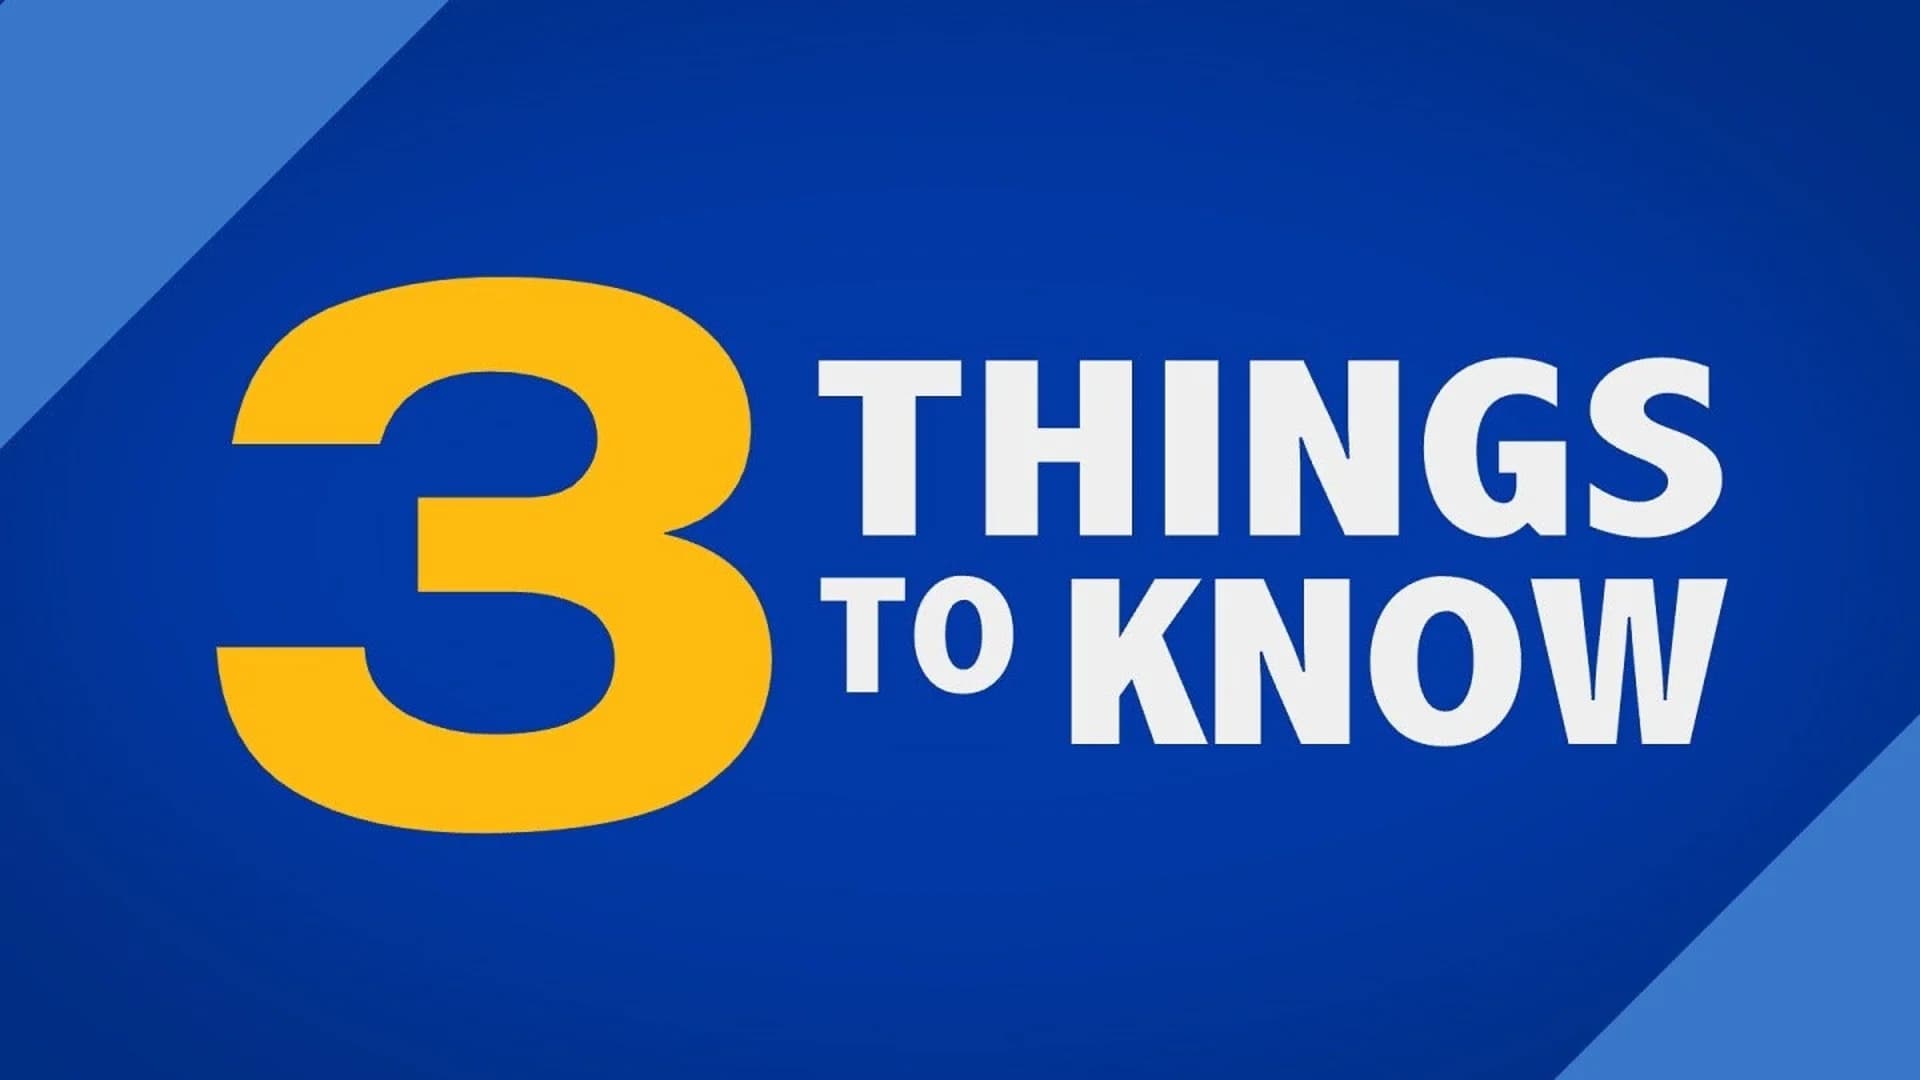 3 Things to Know – April 25, 2018